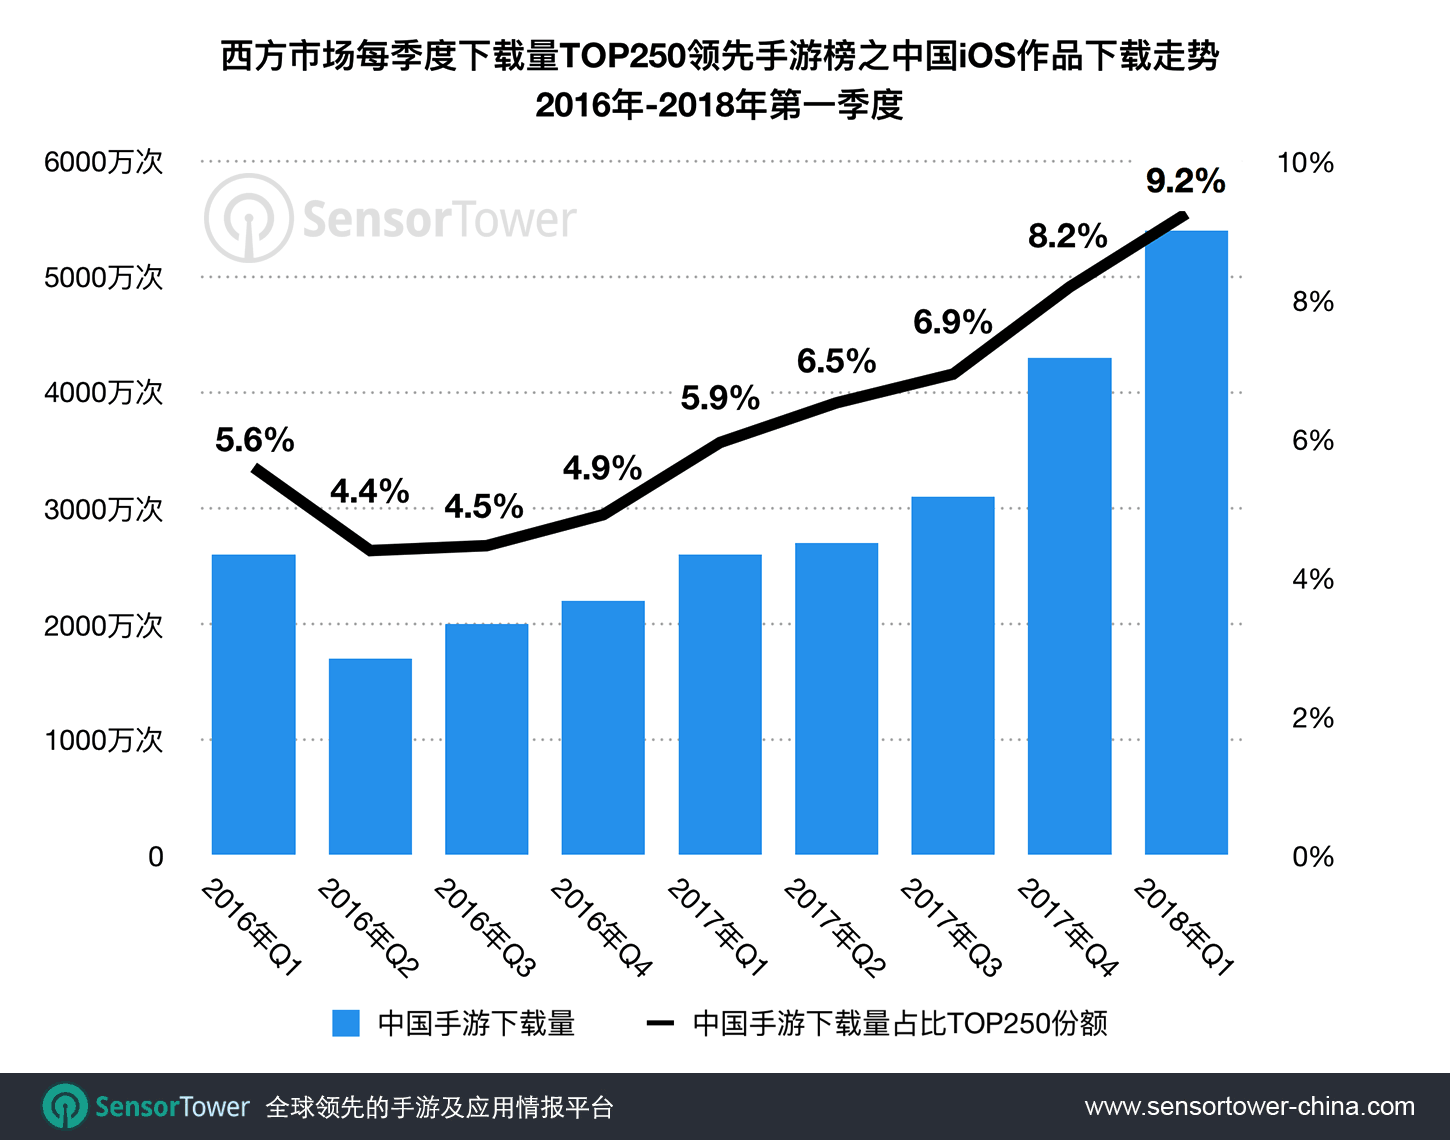 Downloads for Chinese-Made iOS Games within Western Markets' Quarterly Top 250 Titles by Installs